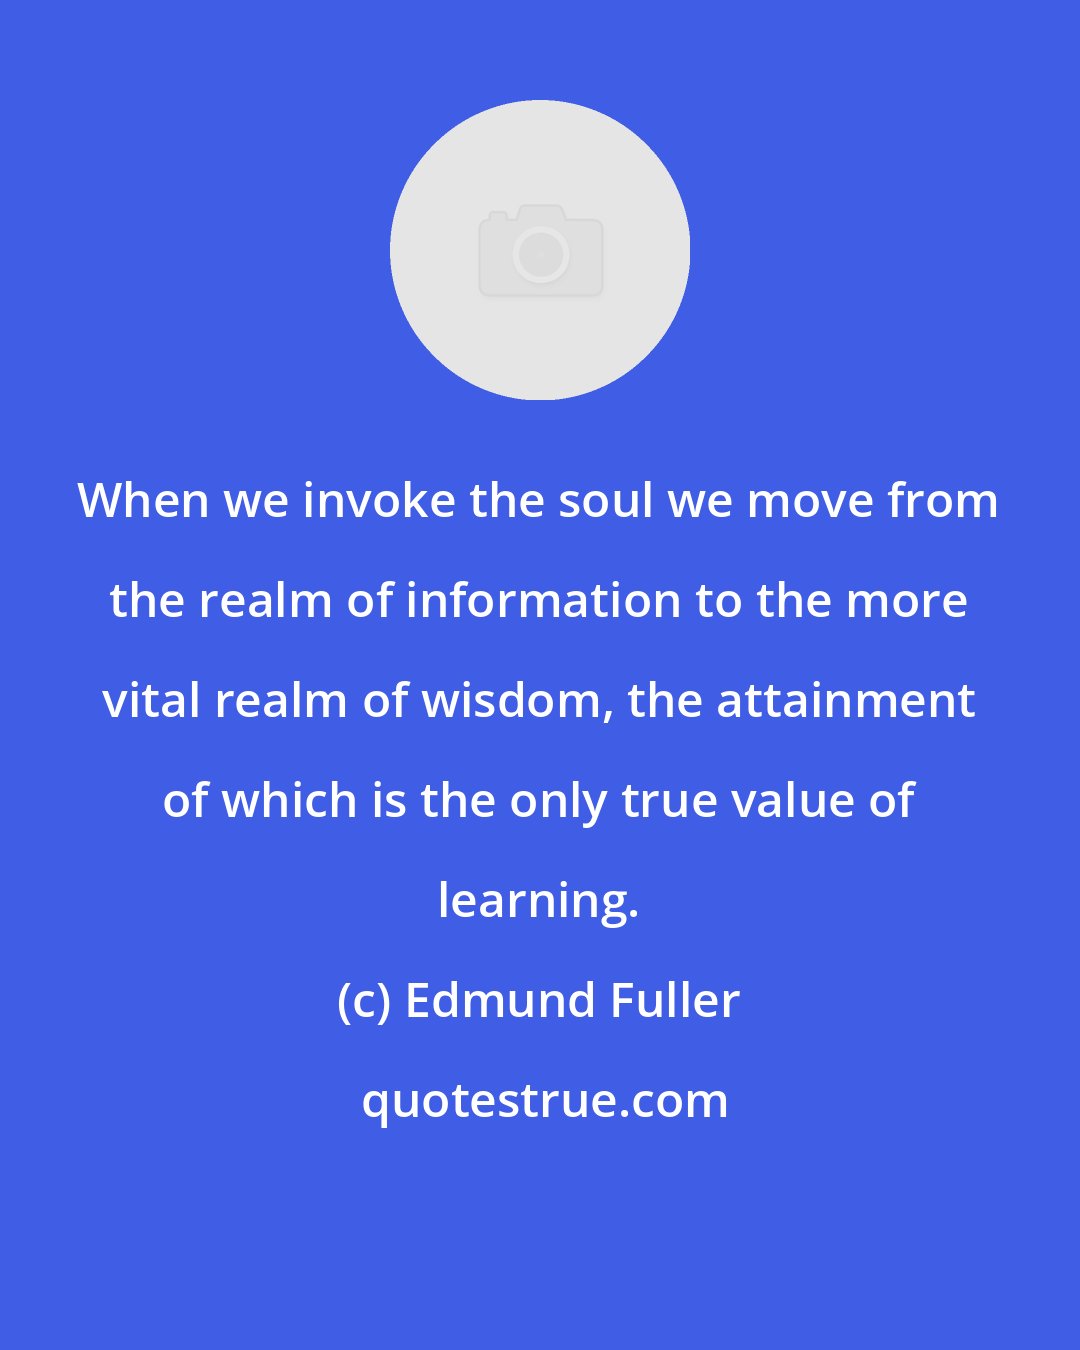 Edmund Fuller: When we invoke the soul we move from the realm of information to the more vital realm of wisdom, the attainment of which is the only true value of learning.